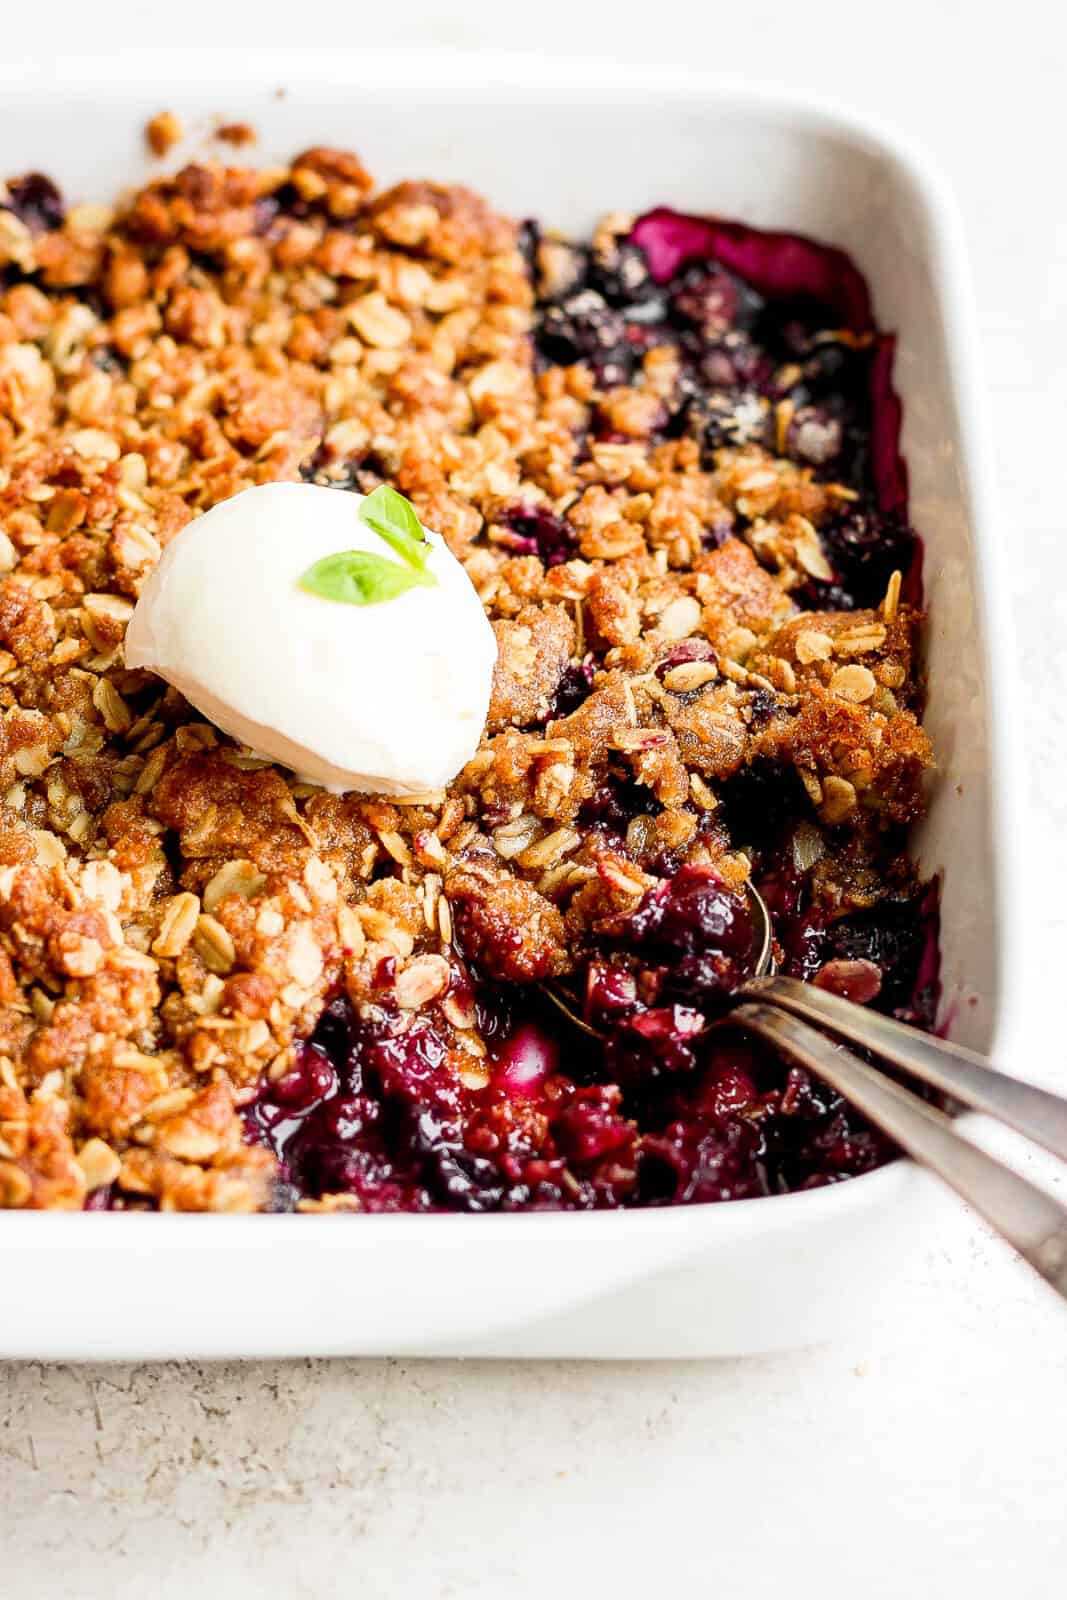 Blueberry crisp and ice cream with two spoons.